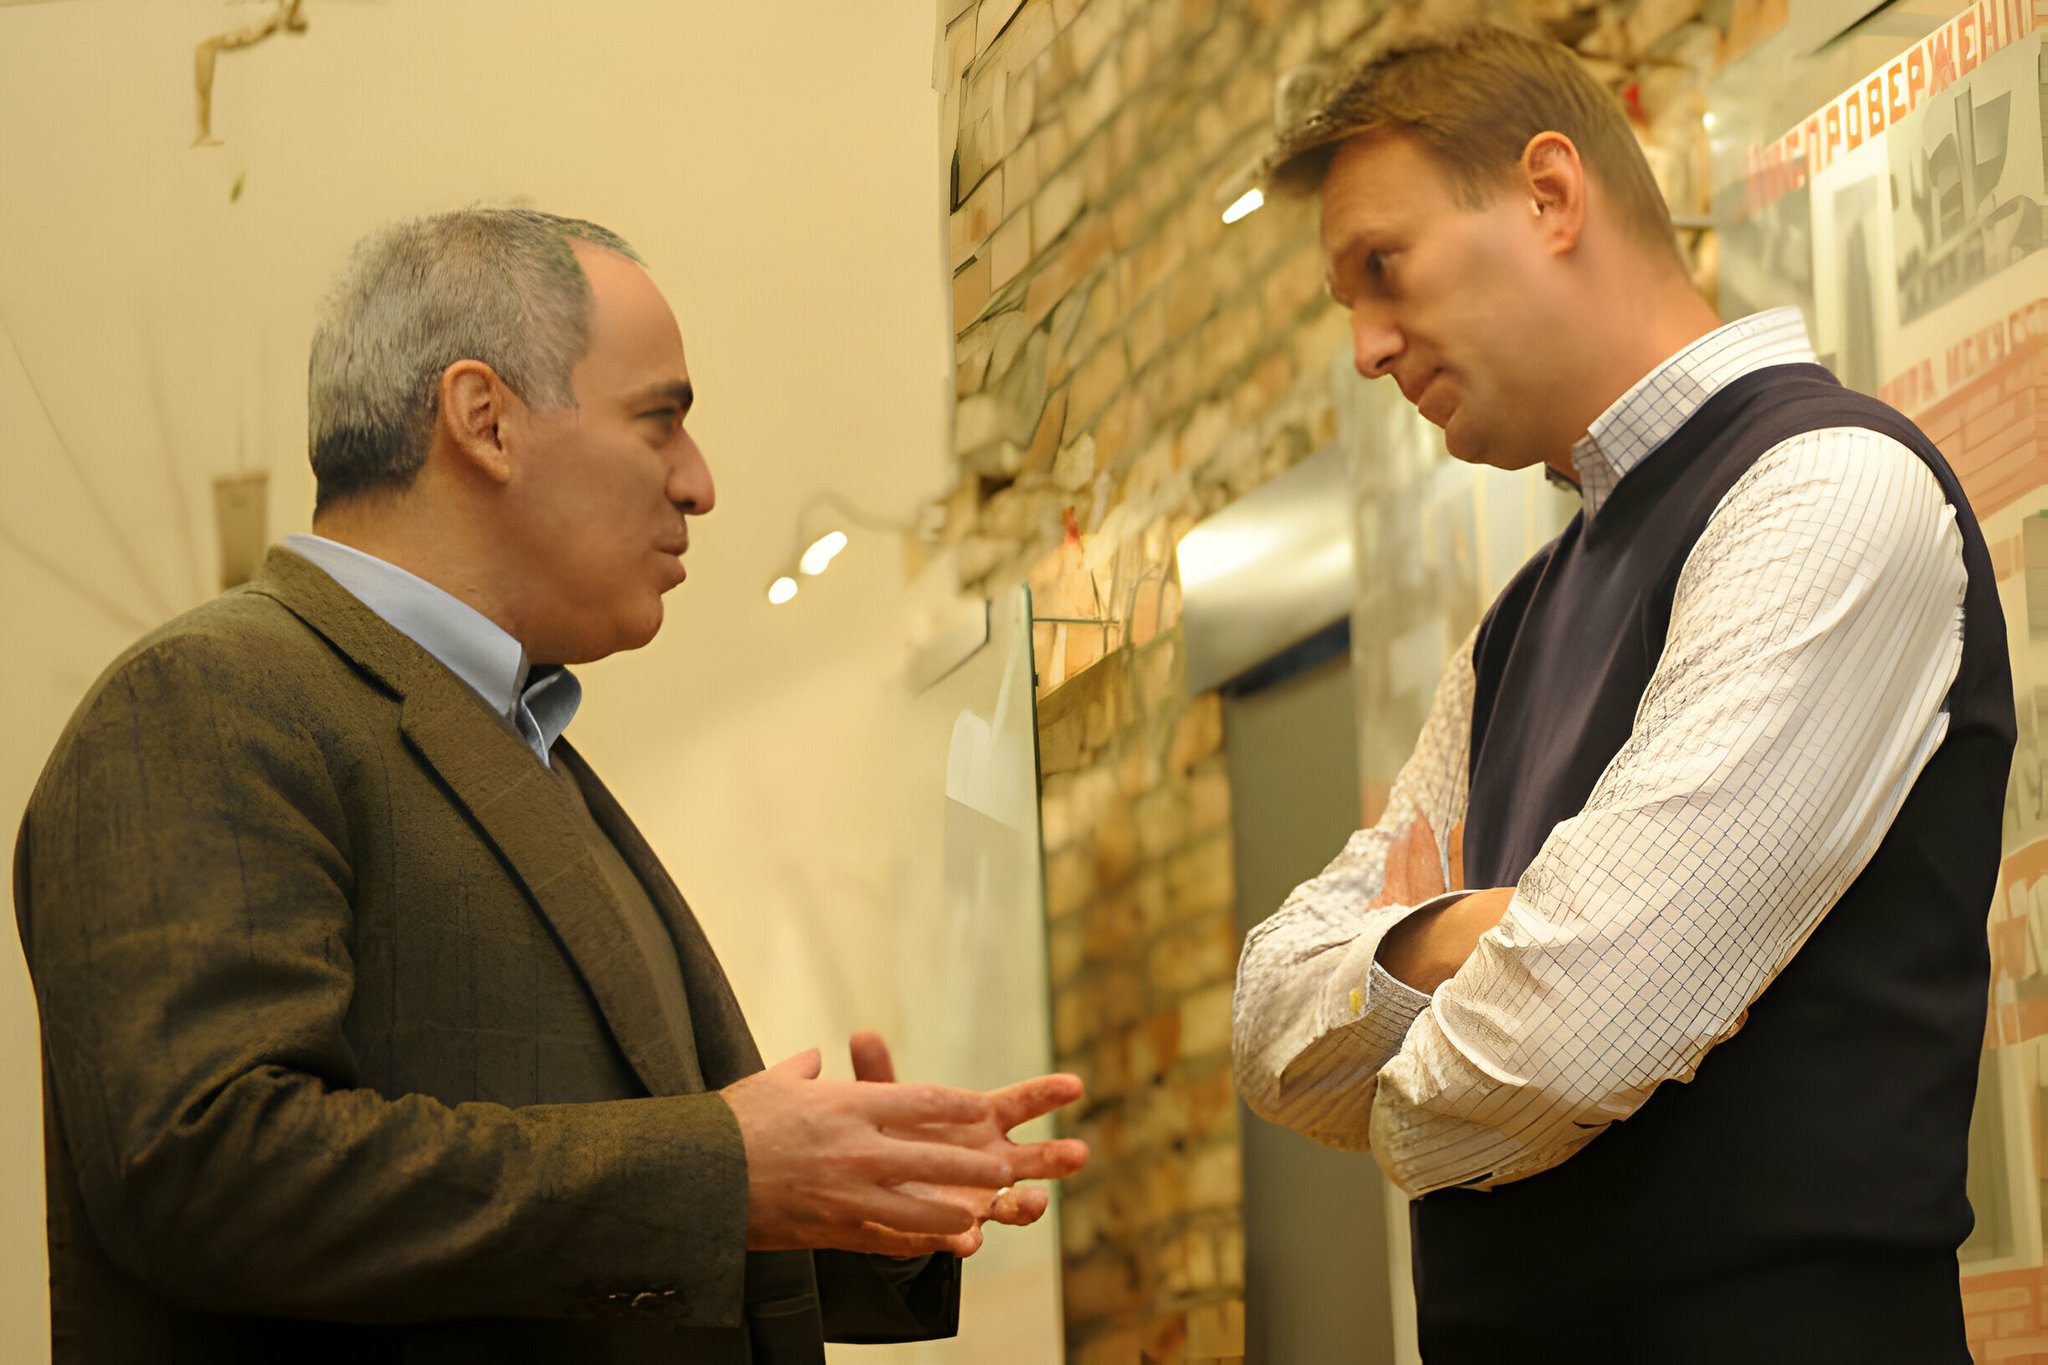 Garry Kasparov on X: "Navalny & I disagreed on many things about the past and future of Russia, as with many in the broad anti-Putin coalition. But we agreed that Putin had